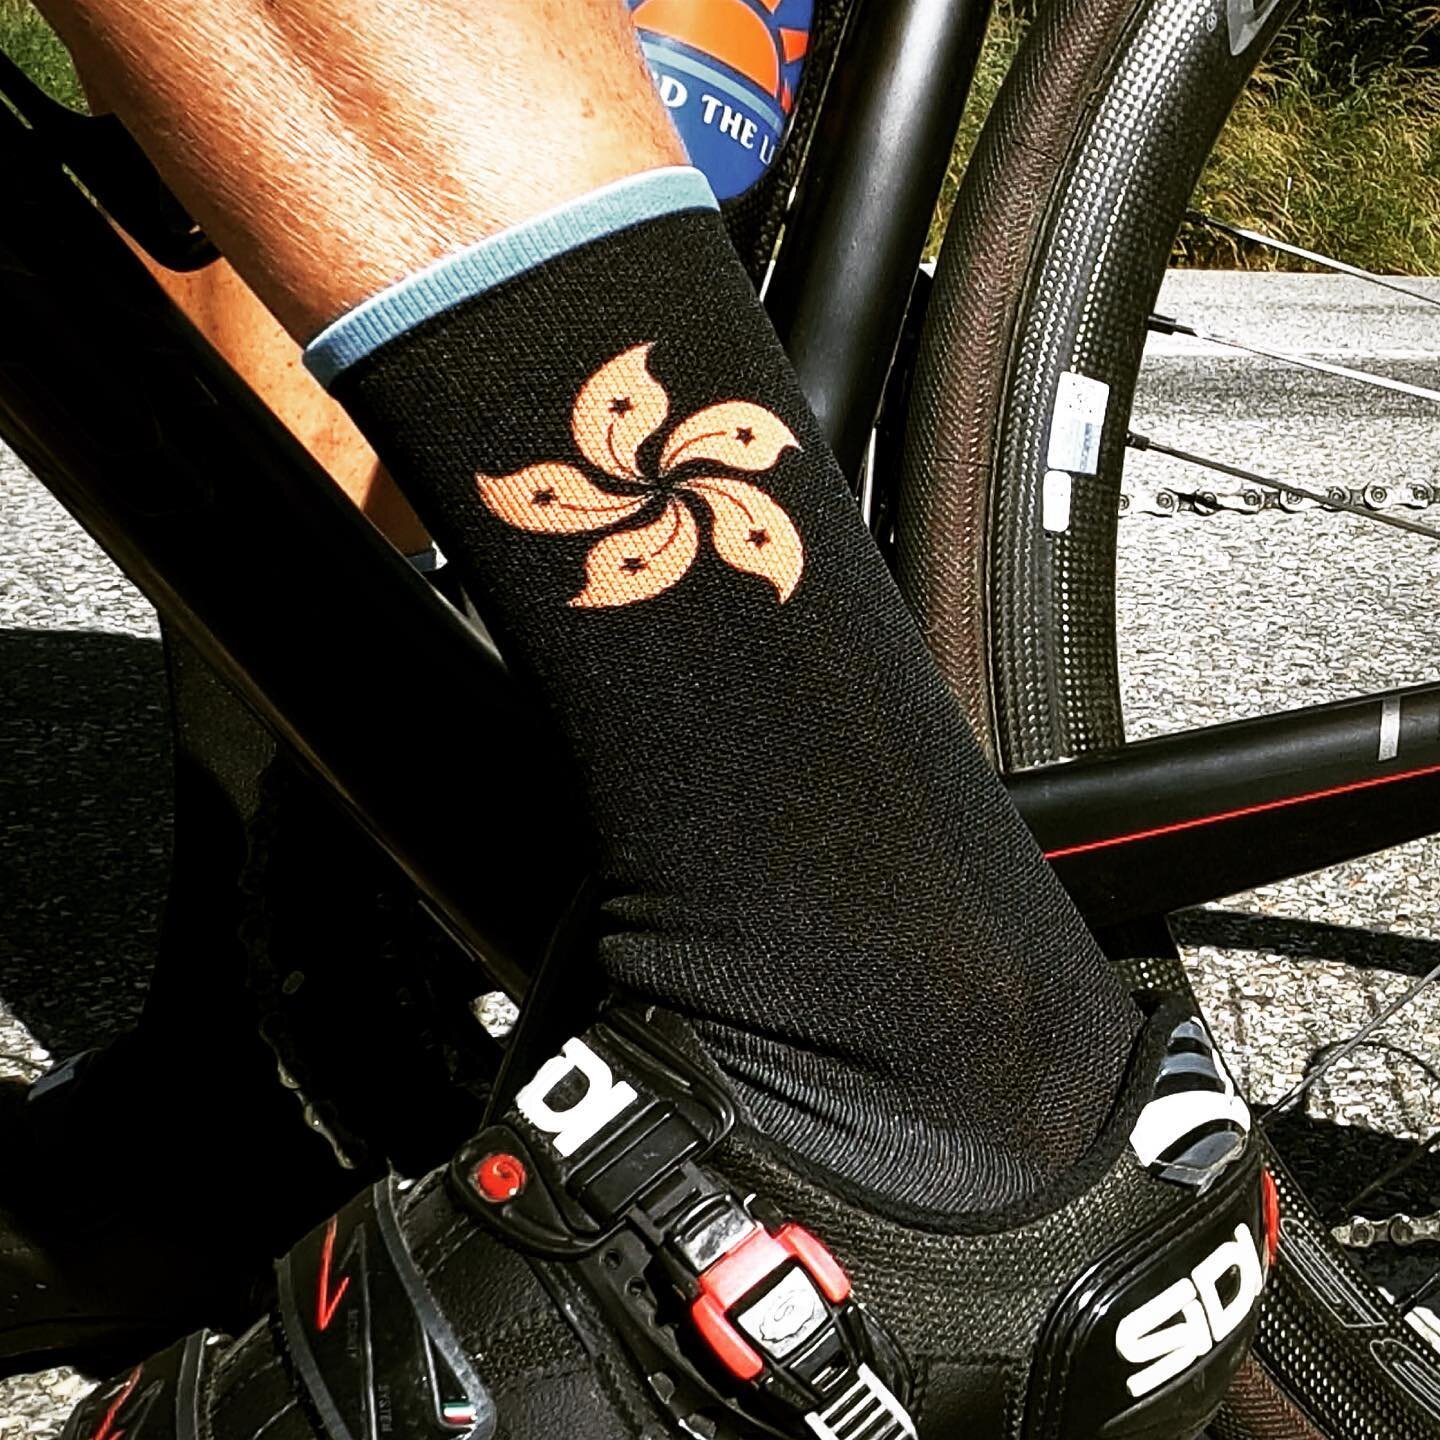 Hong Kong, you will always remain in my heart, but also on my socks! Wearing my #cuoreofswiss_asia socks on every French mountain path this month! #beyondthelinecoaching #cuoreofswiss